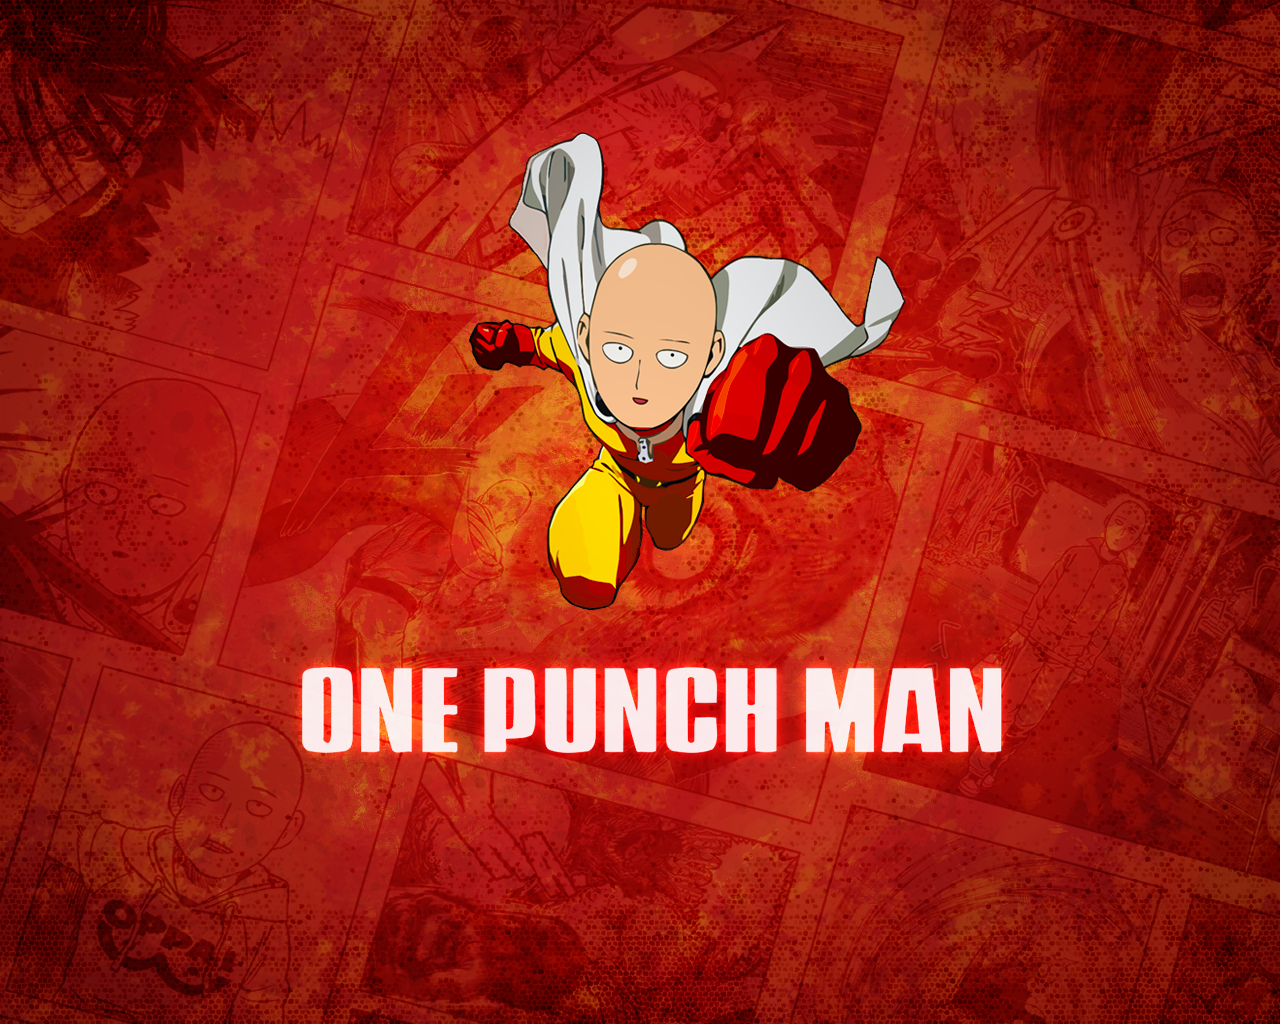 one punch man wallpaper,cartoon,red,animated cartoon,illustration,fictional character